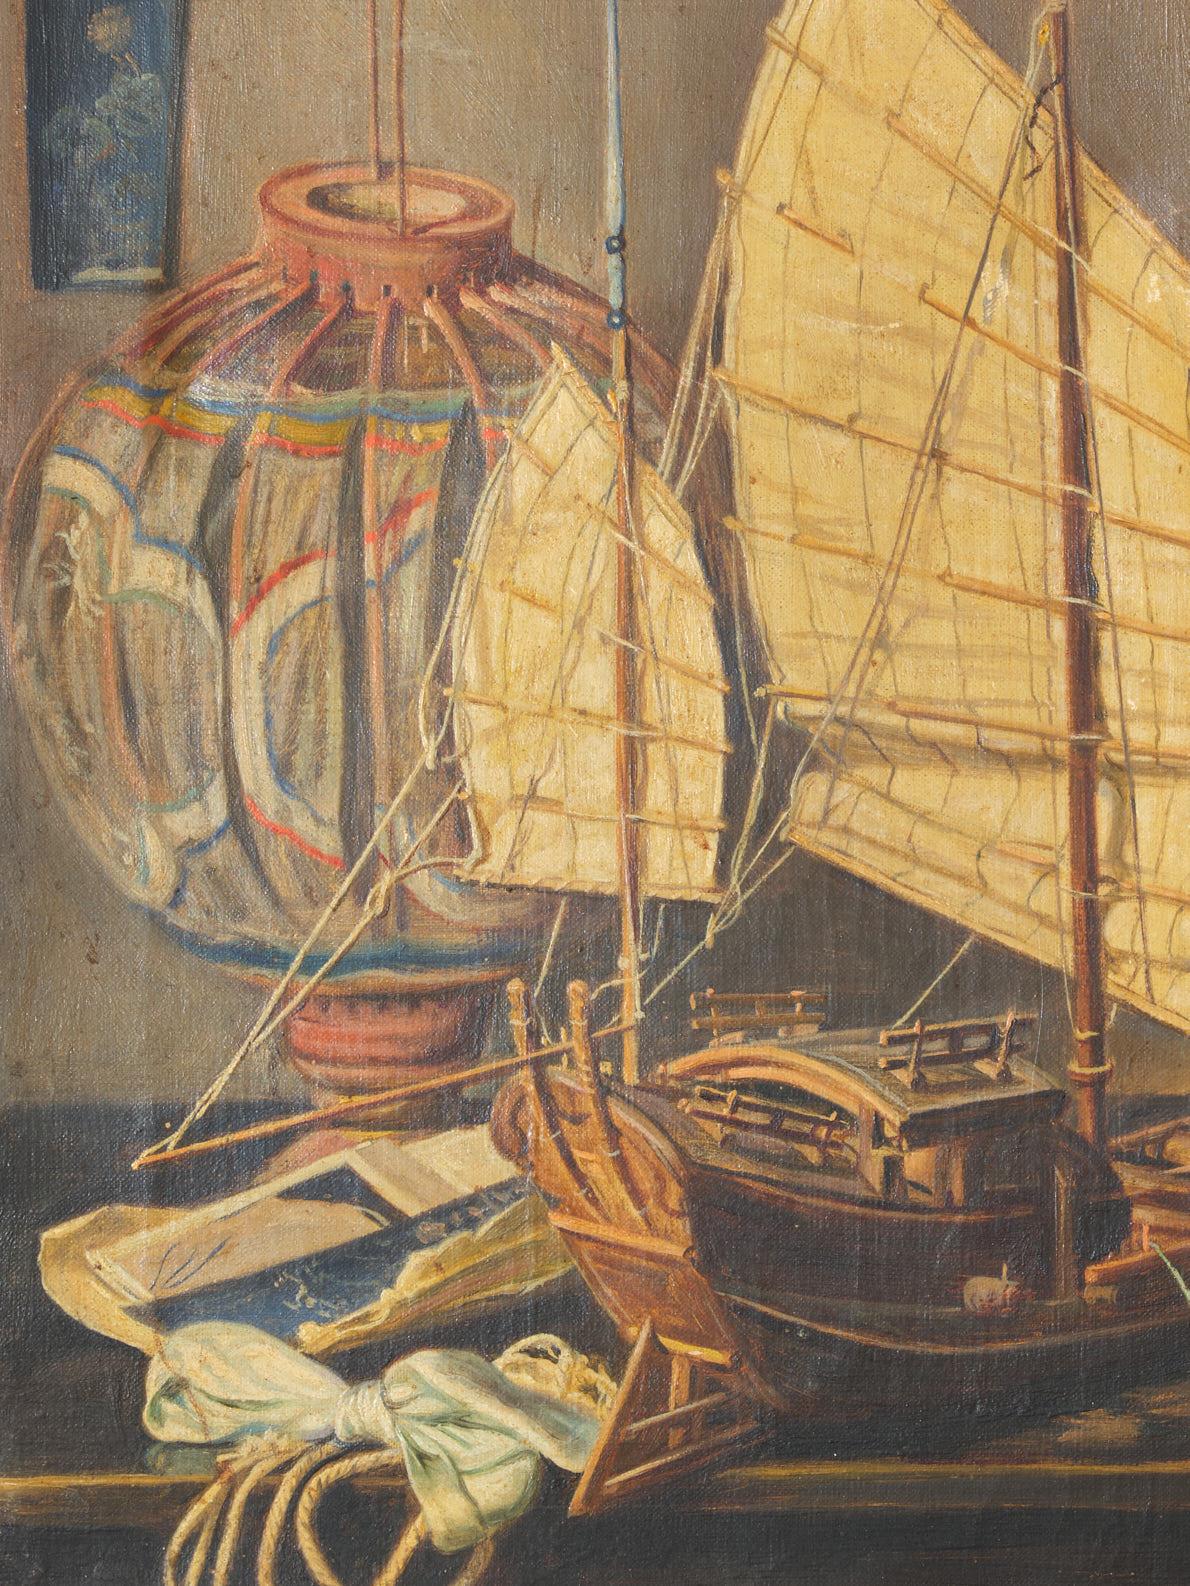 Painting, Oil, Signed, Painting of a Junk & a Lantern, C 1920, Florence, Italy For Sale 2